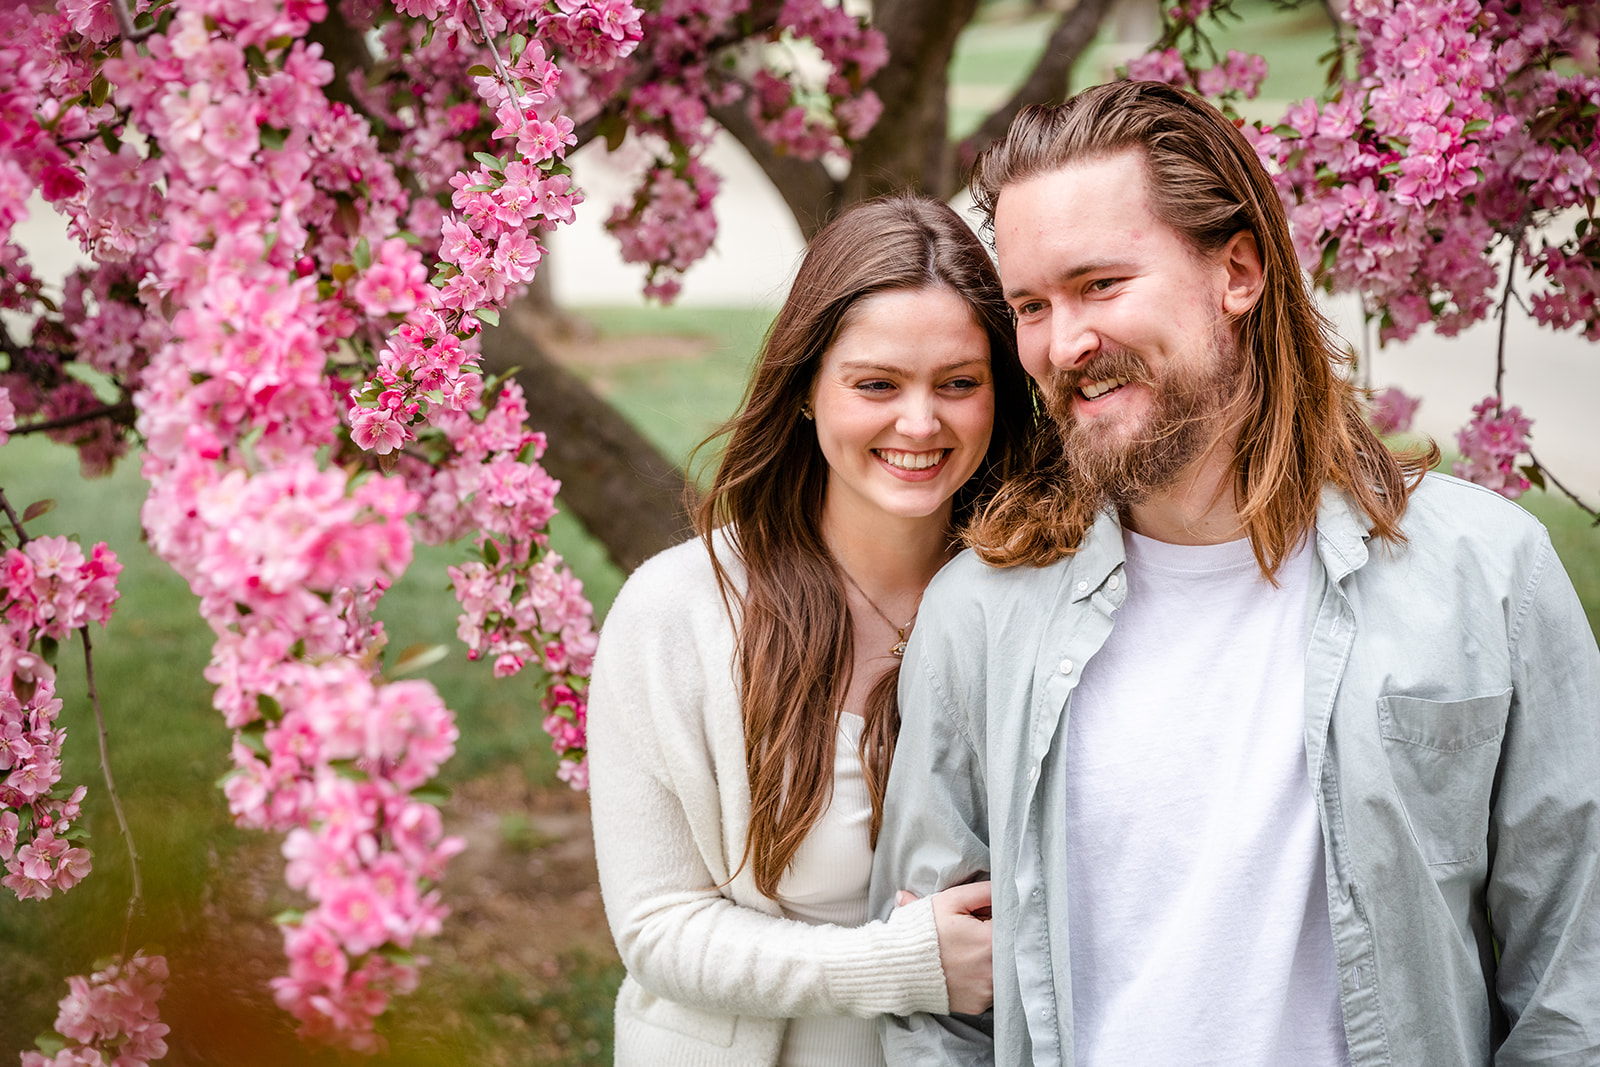 Women looking over shoulder of man during engagement shoot with man laughing